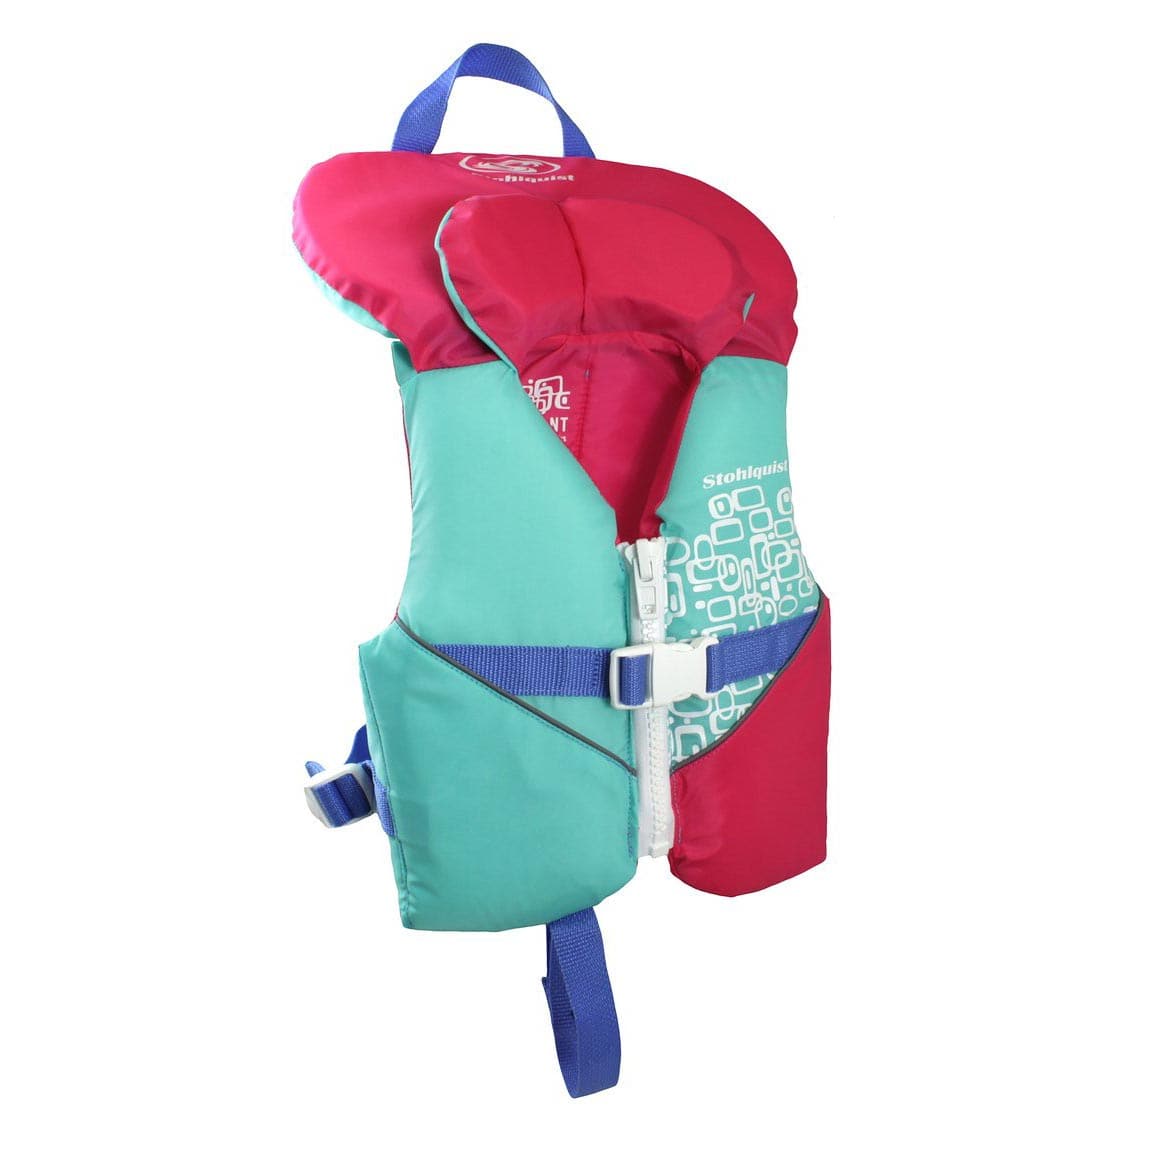 Featuring the Infant & Child PFDs kid's pfd manufactured by Stohlquist shown here from a sixth angle.